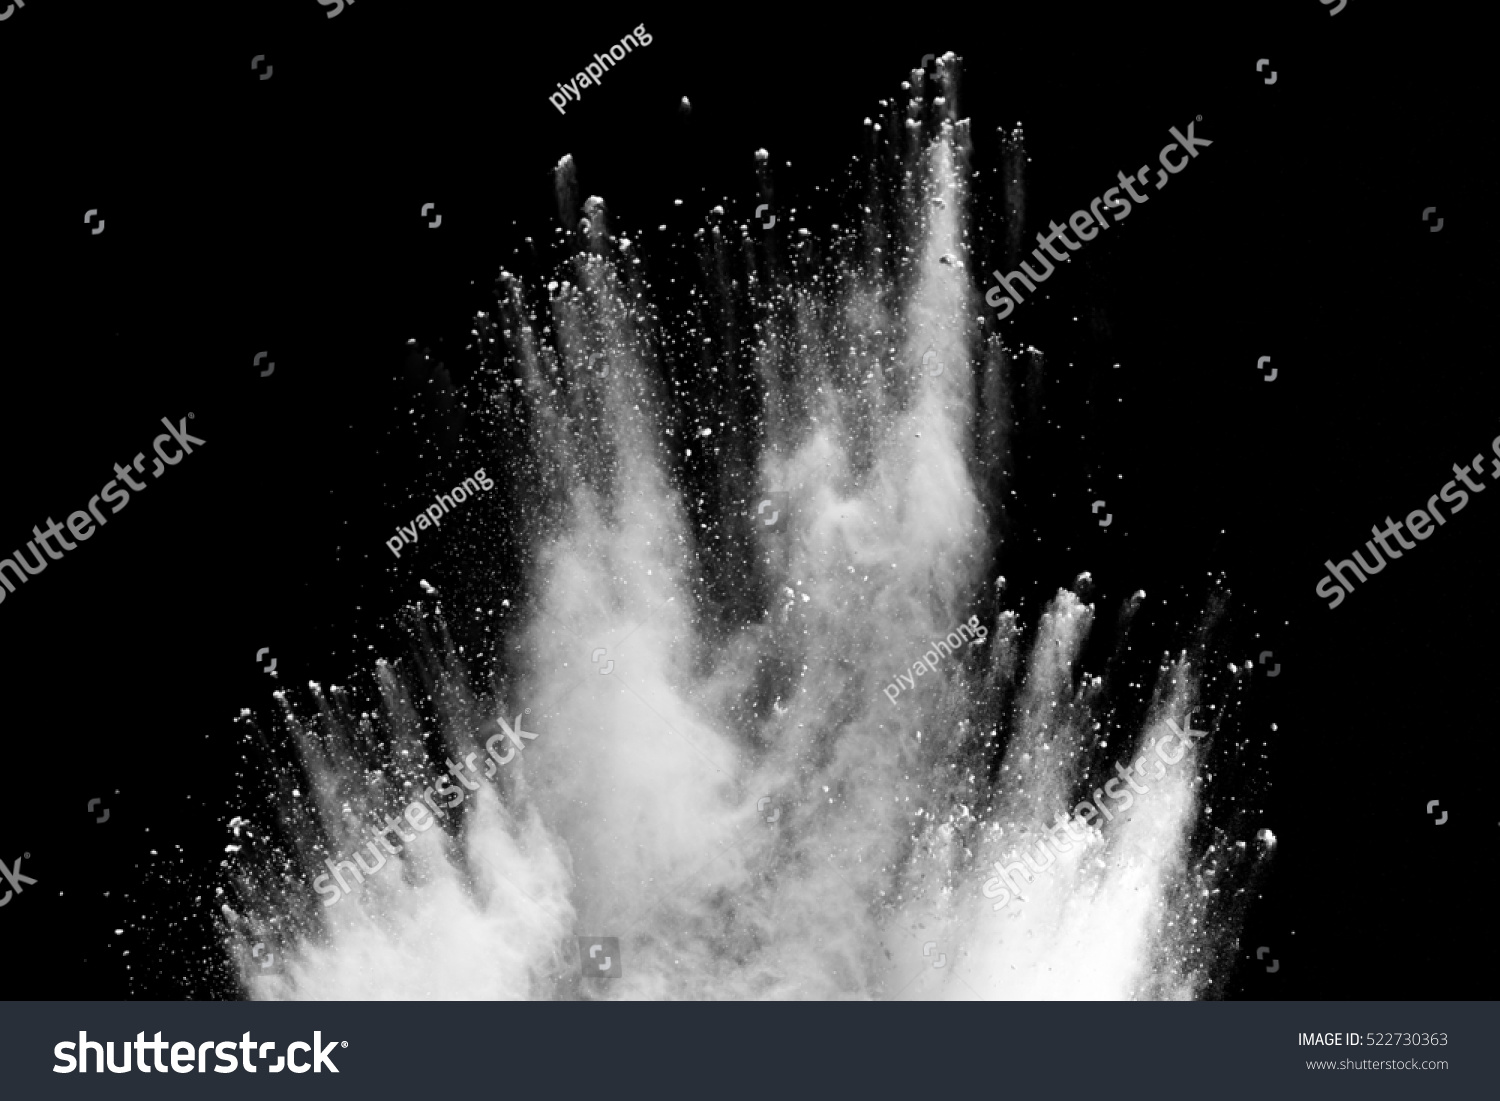 Launched white powder, isolated on black background #522730363